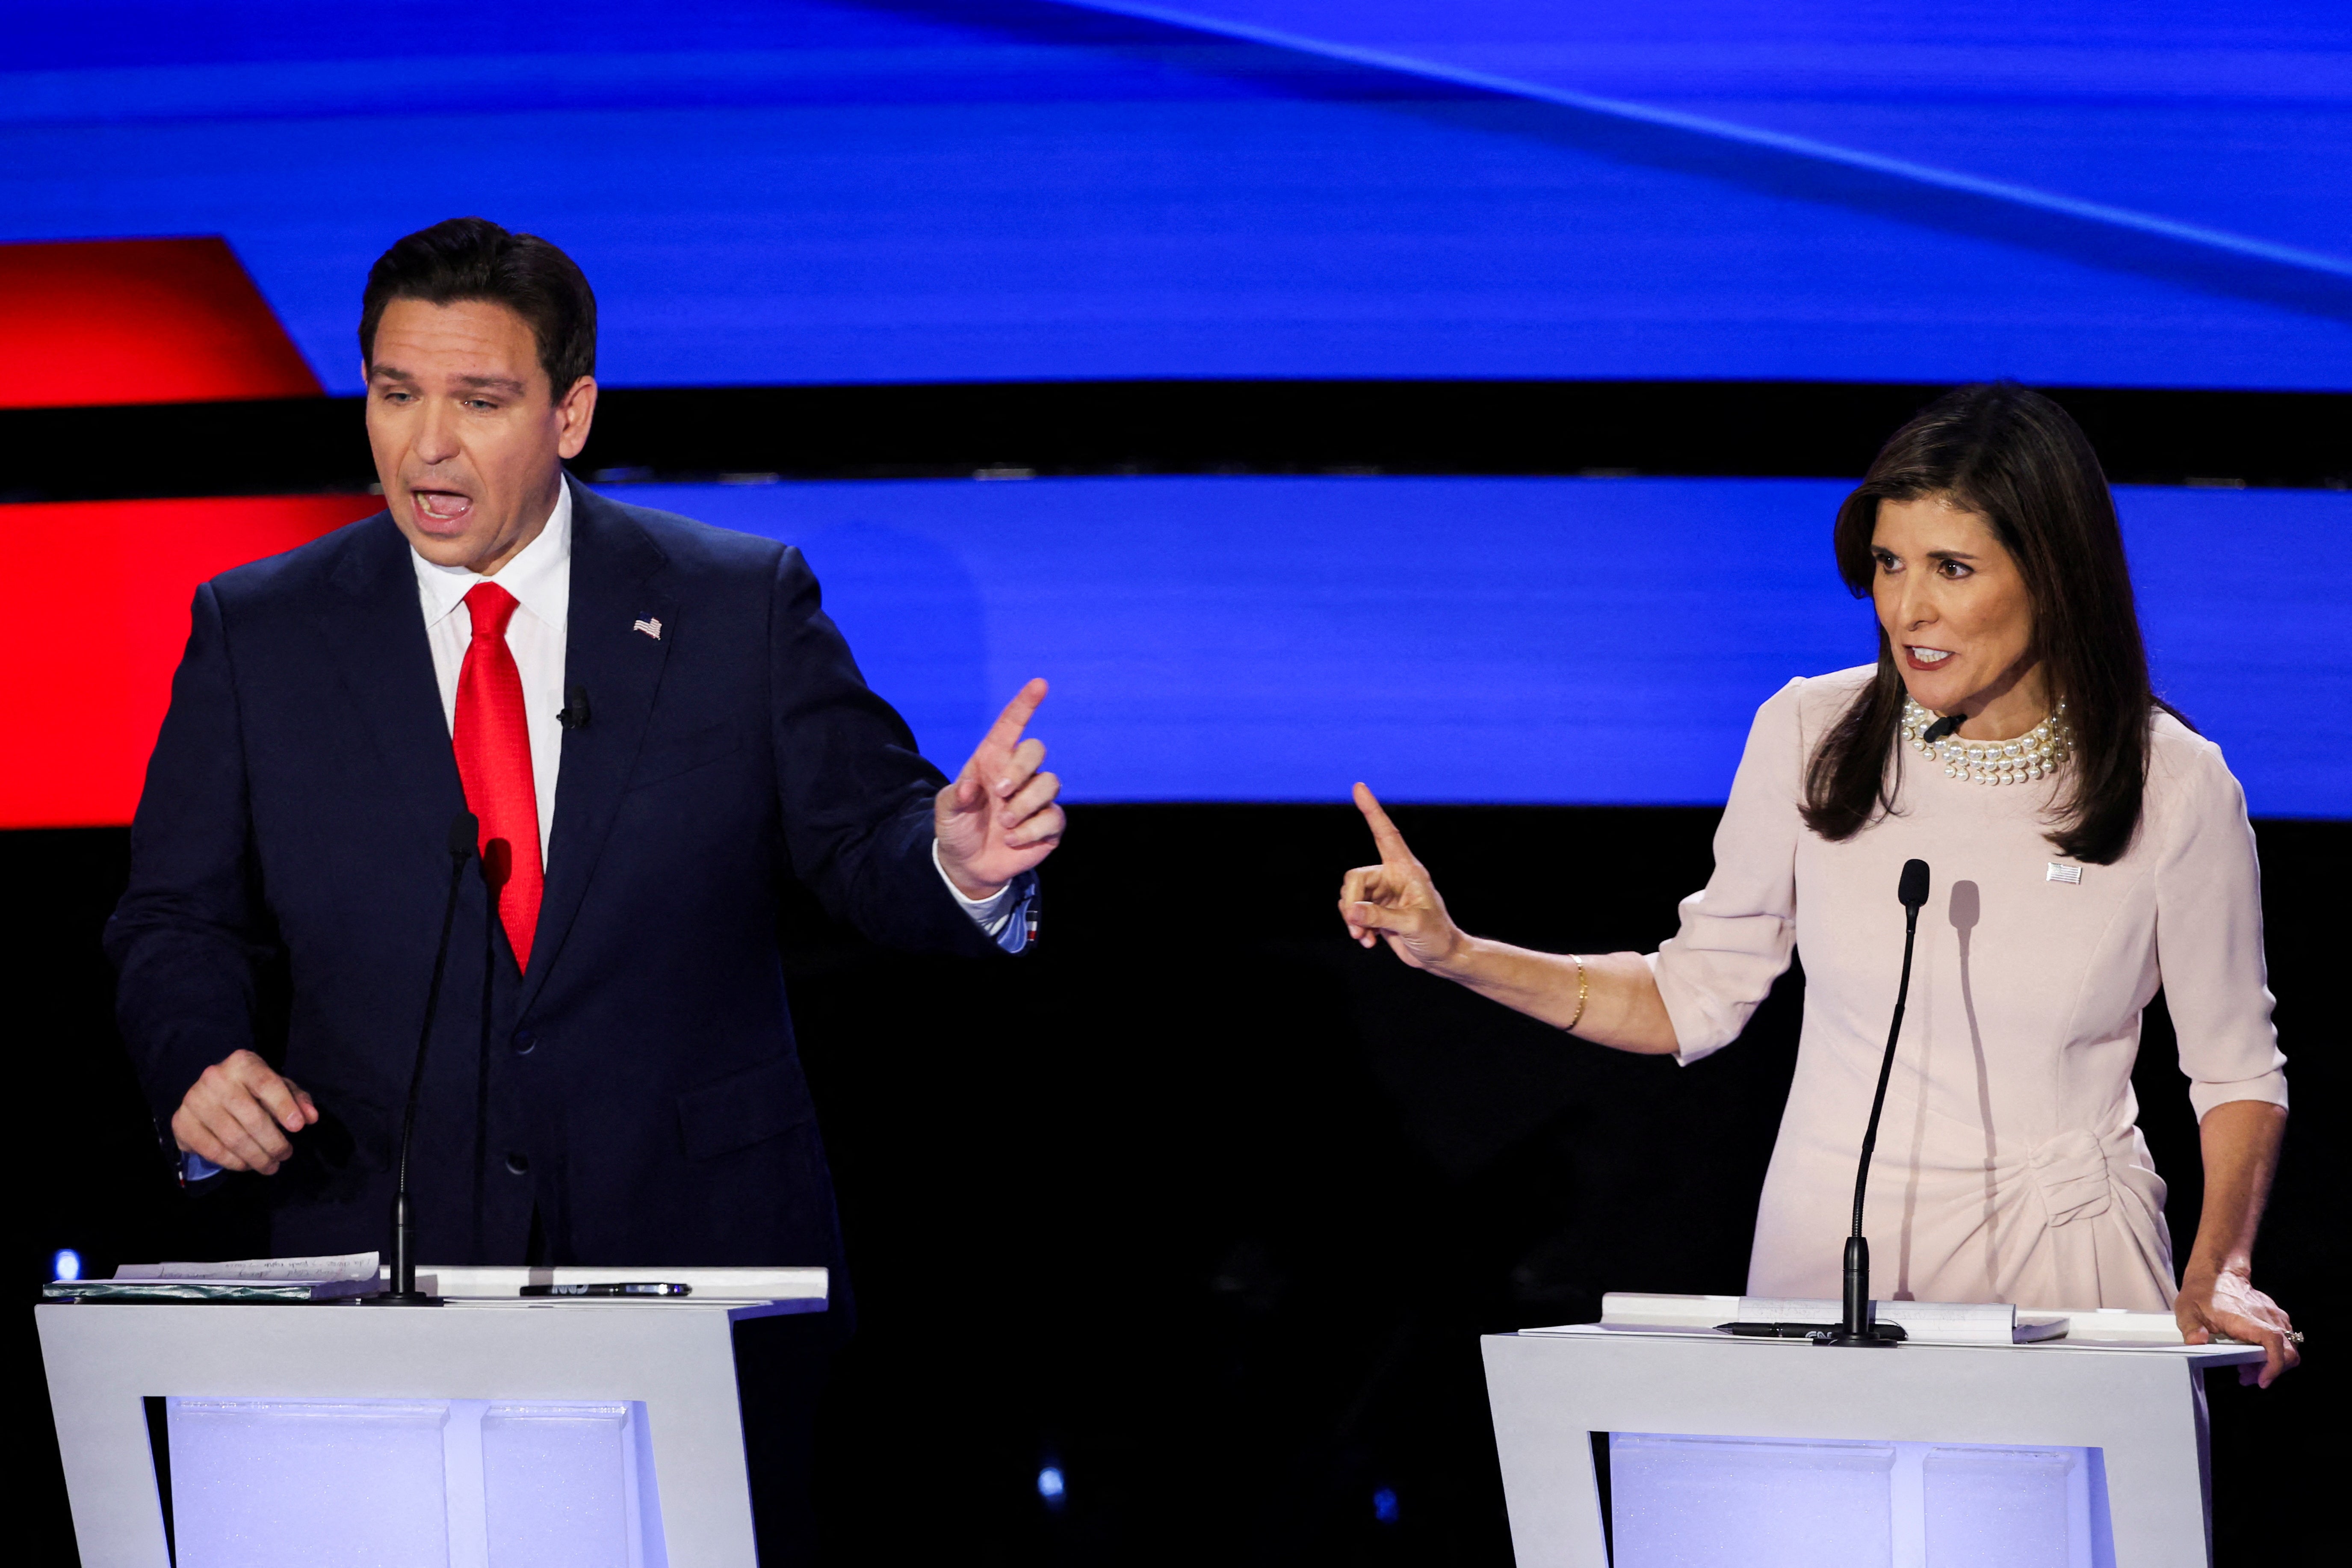 Republican candidates Ron DeSantis and Nikki Haley participate in the Republican presidential debate hosted by CNN at Drake University in Des Moines, Iowa, on Wednesday 10 January